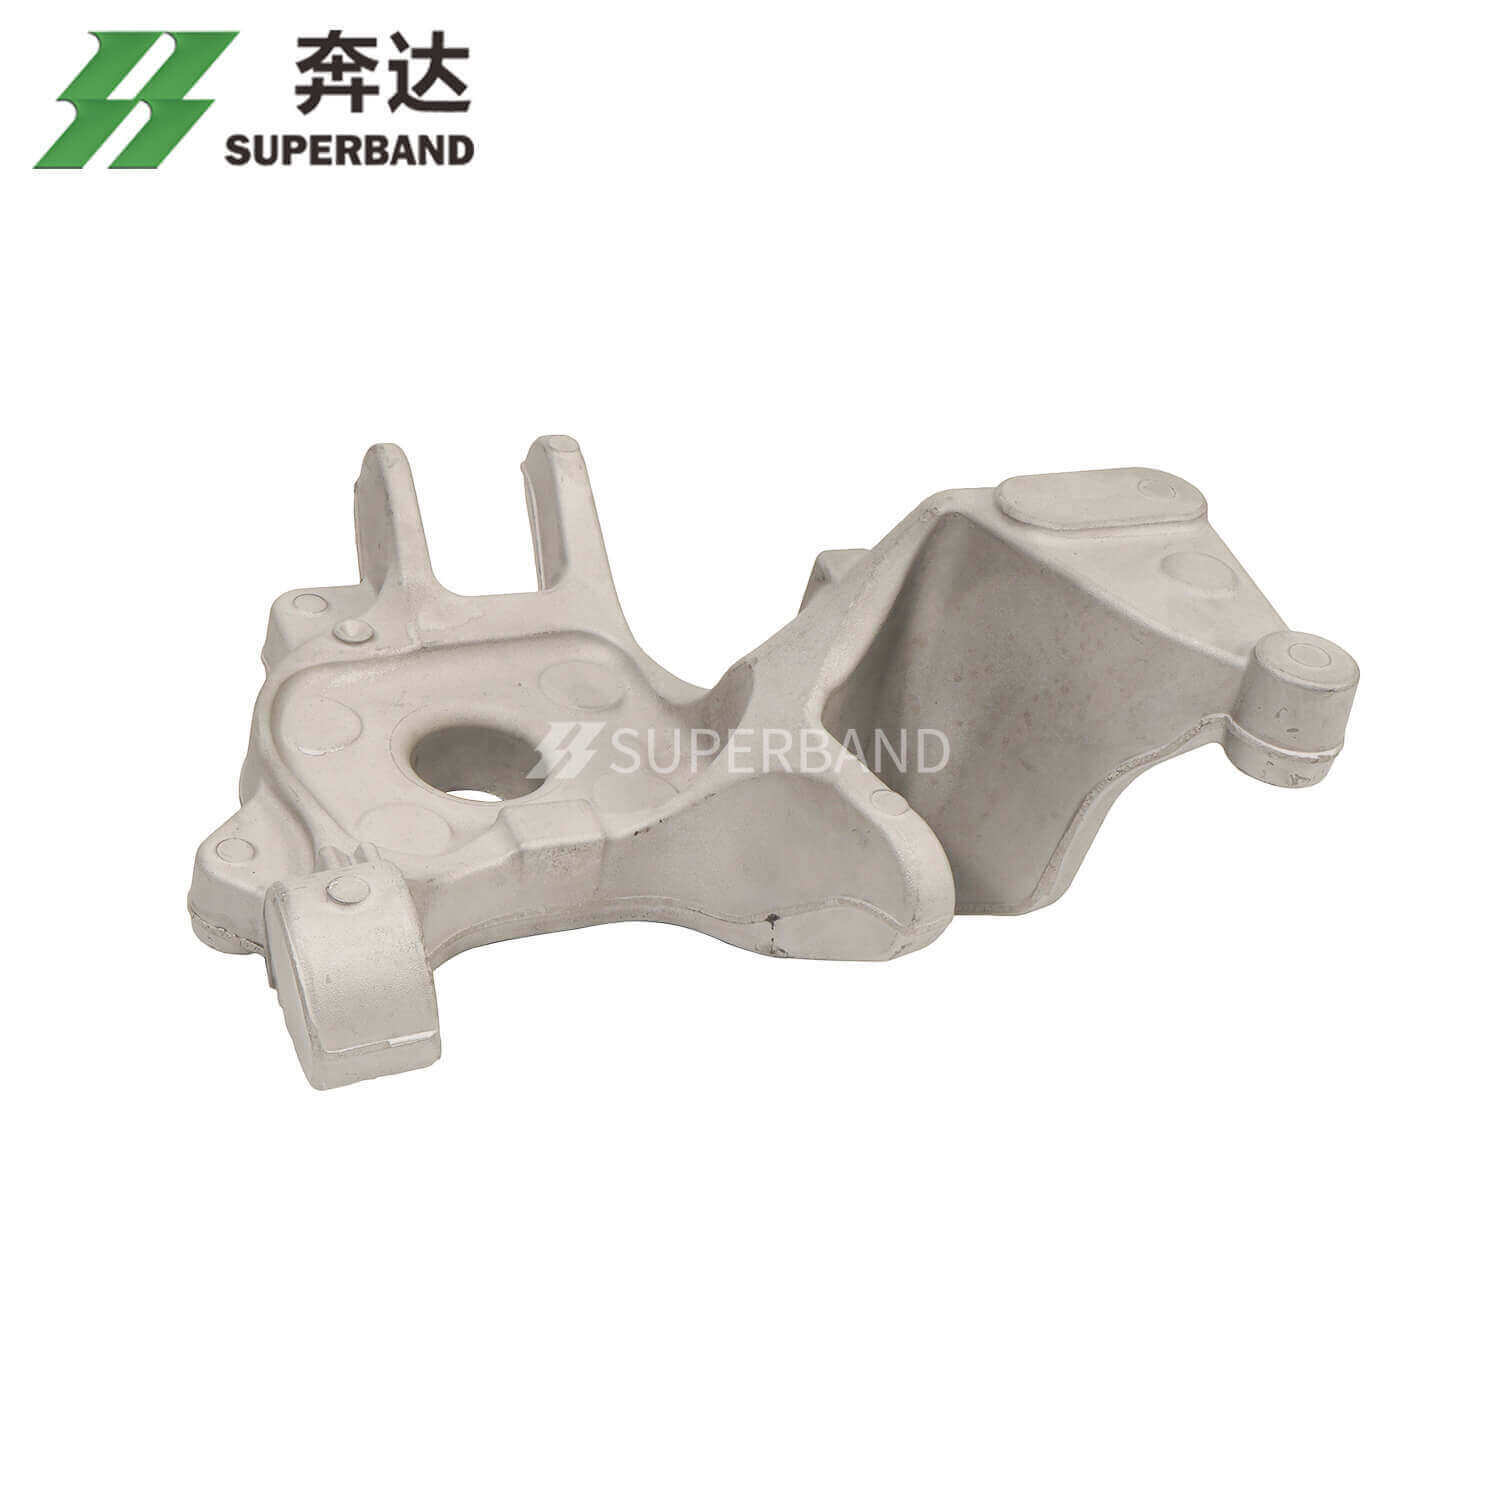 die casting in automotive industry